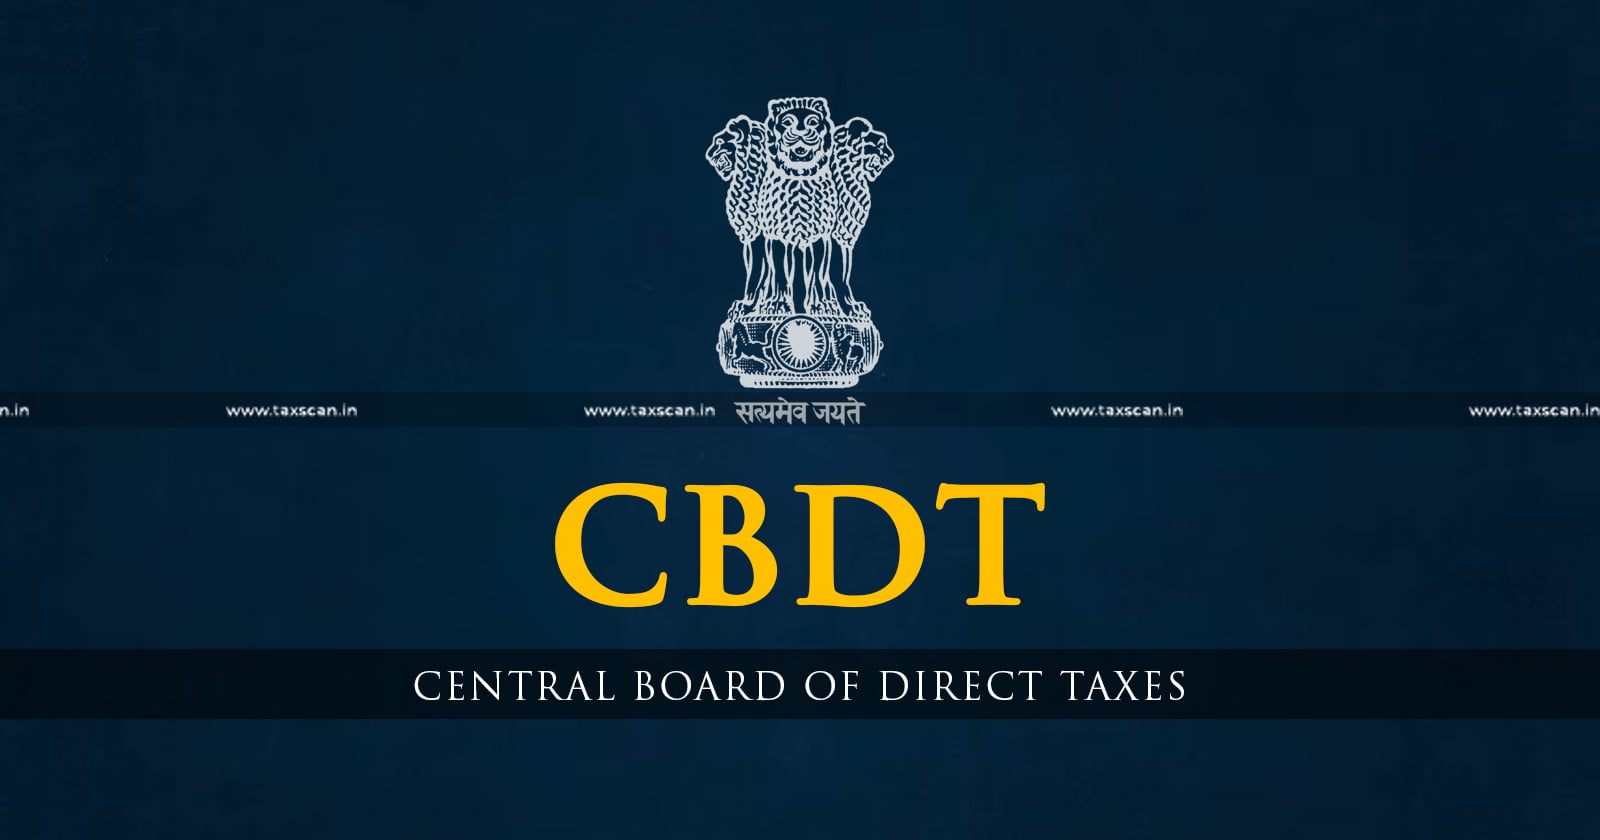 CBDT - application of Section 115TD - provisional registration by charitable trusts - filing of audit reports by charitable trusts - charitable trusts - Taxscan